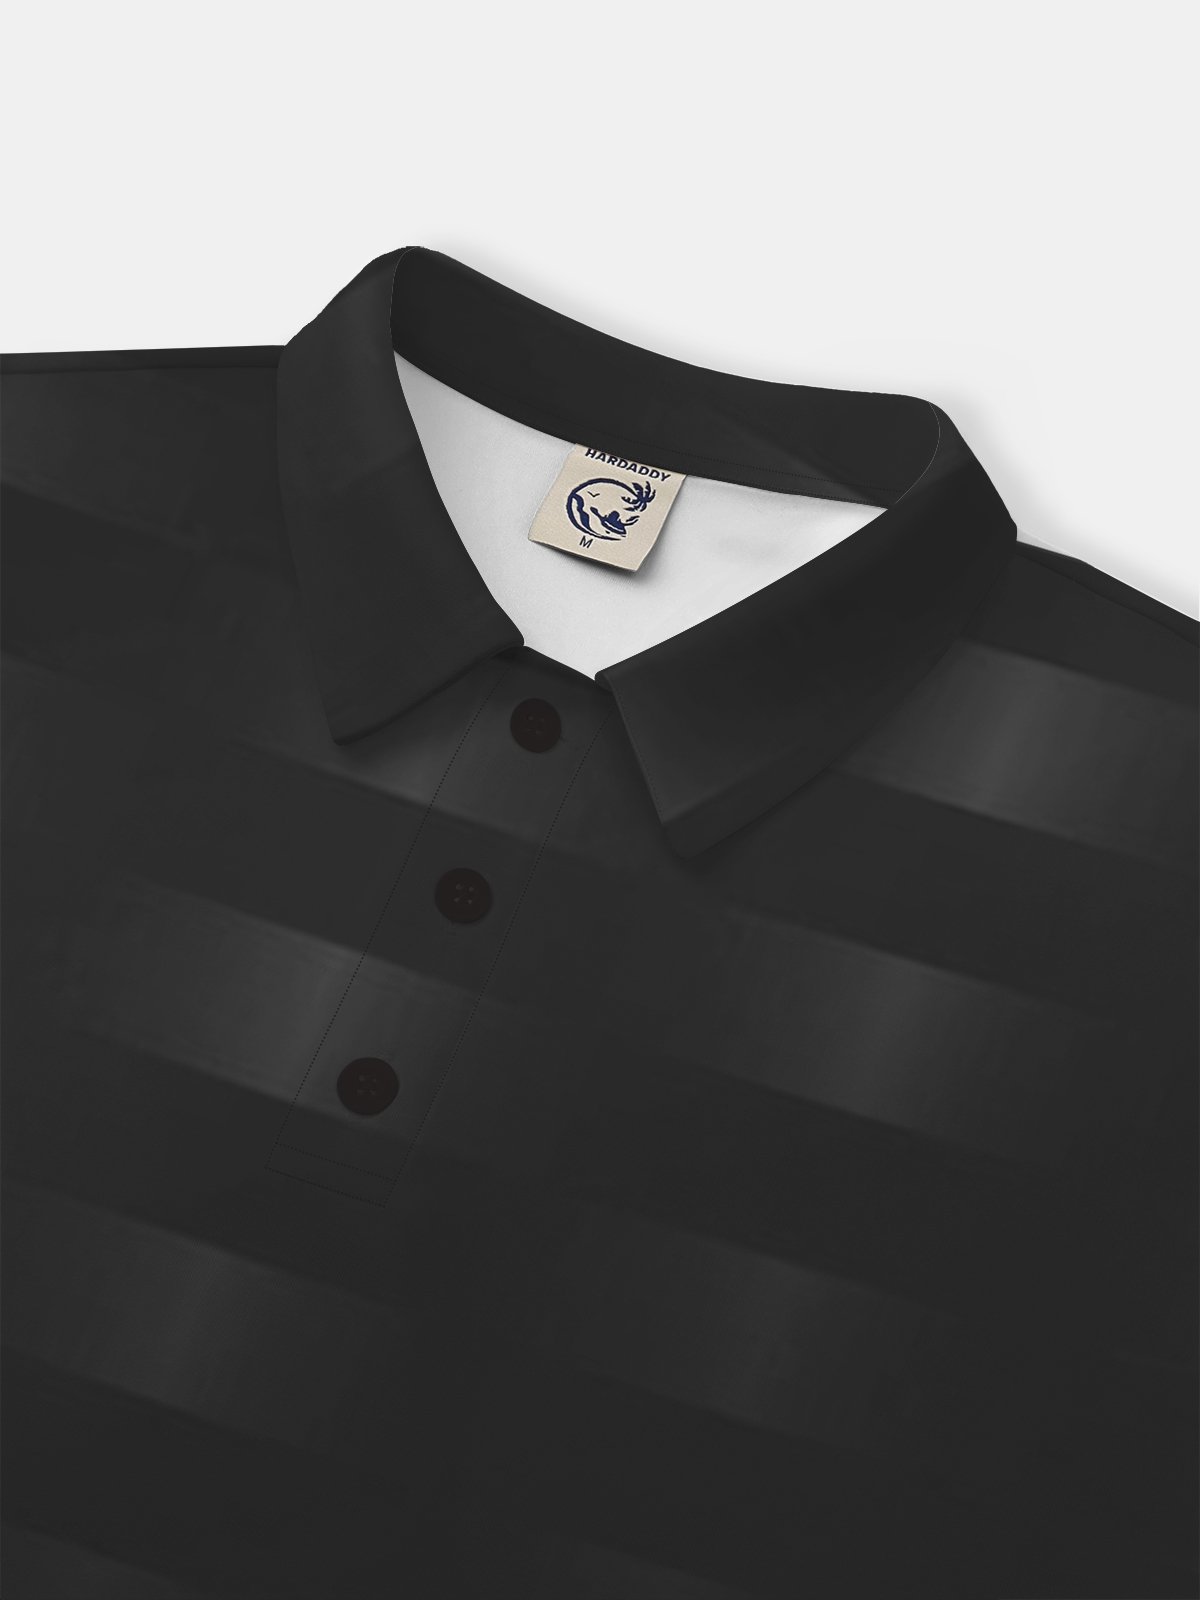 Hardaddy Moisture Wicking Golf Polo 3D Gradient Abstract Geometric